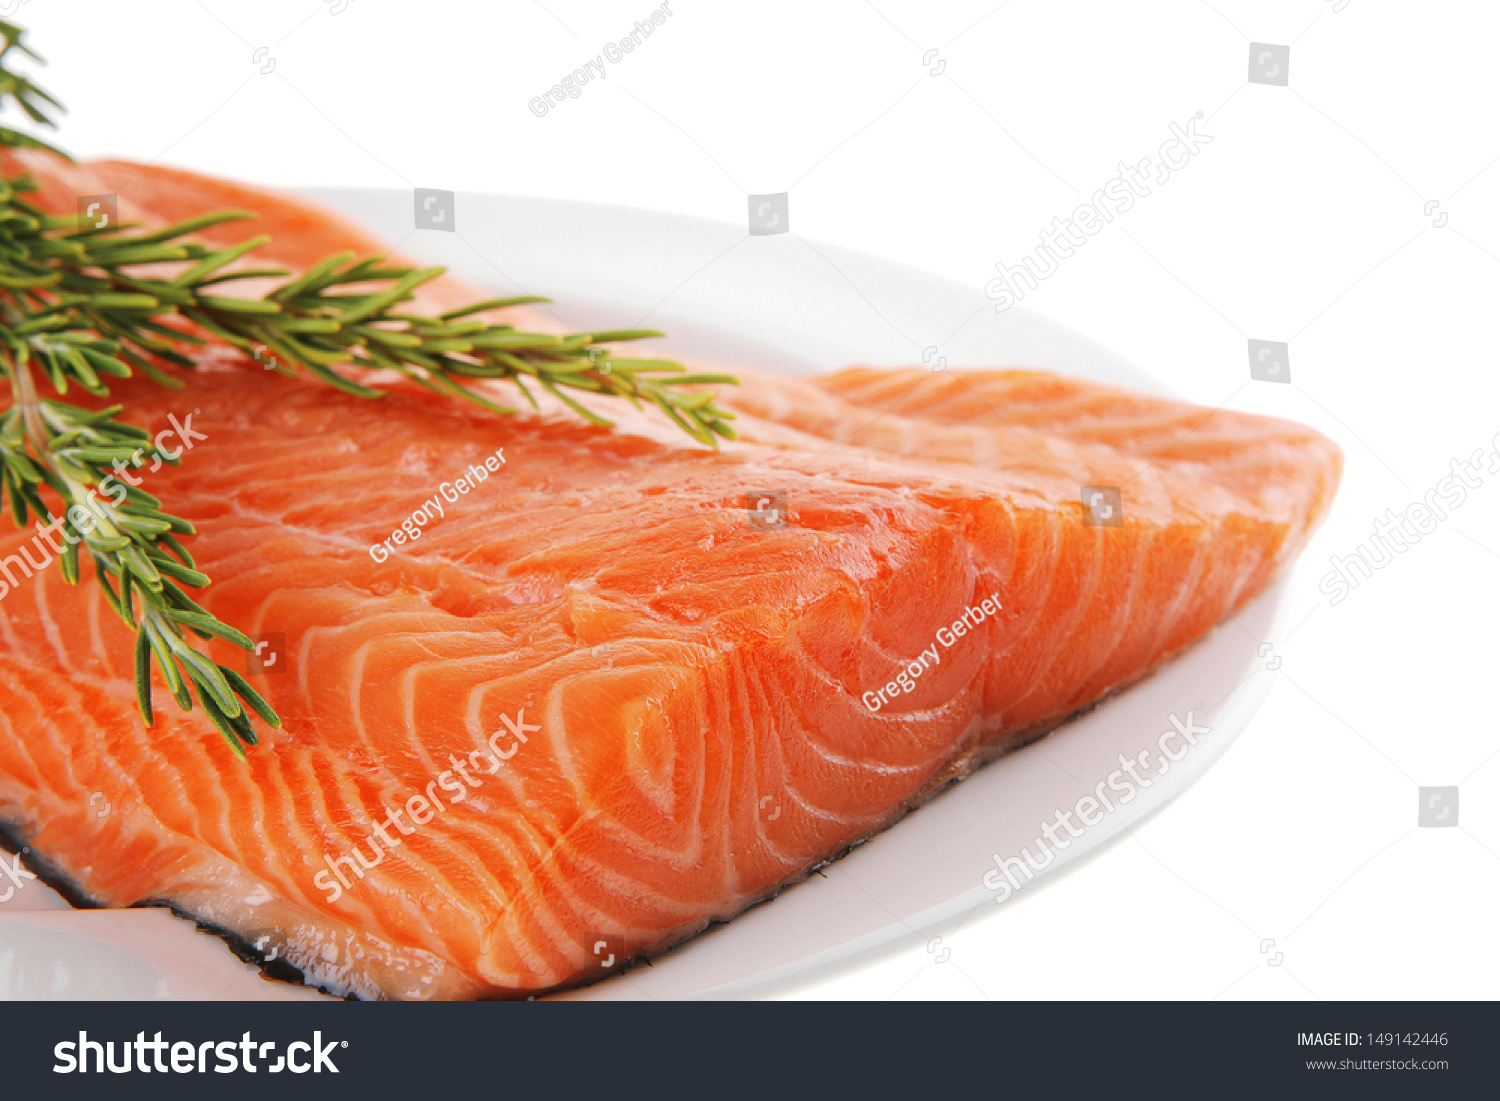 Fresh Raw Red Fish Fillet On White Plate And Rosemary Stock Photo ...